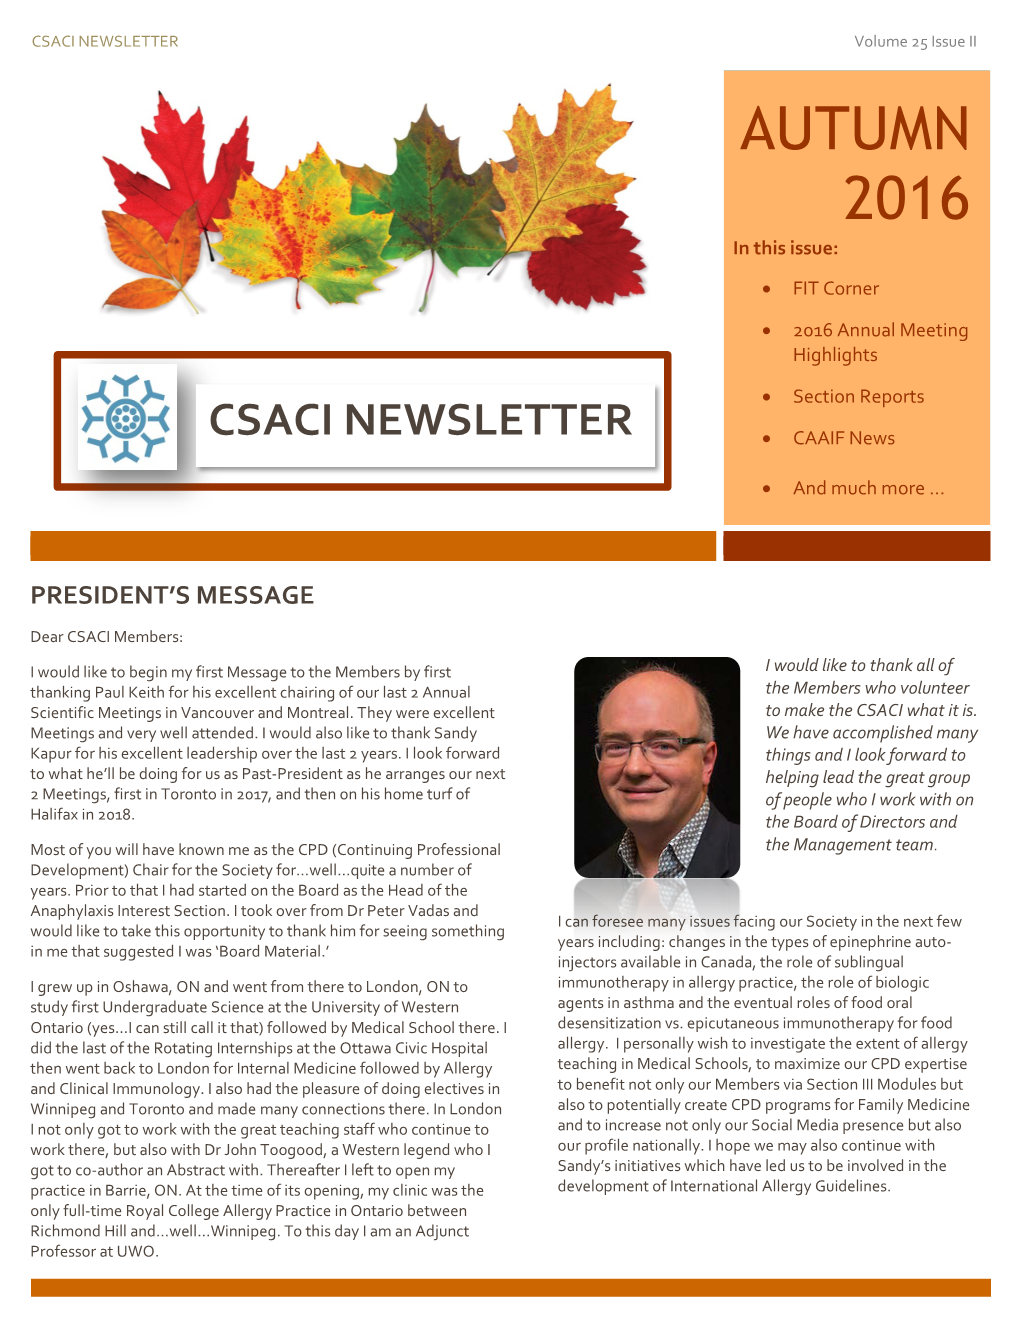 AUTUMN 2016 in This Issue